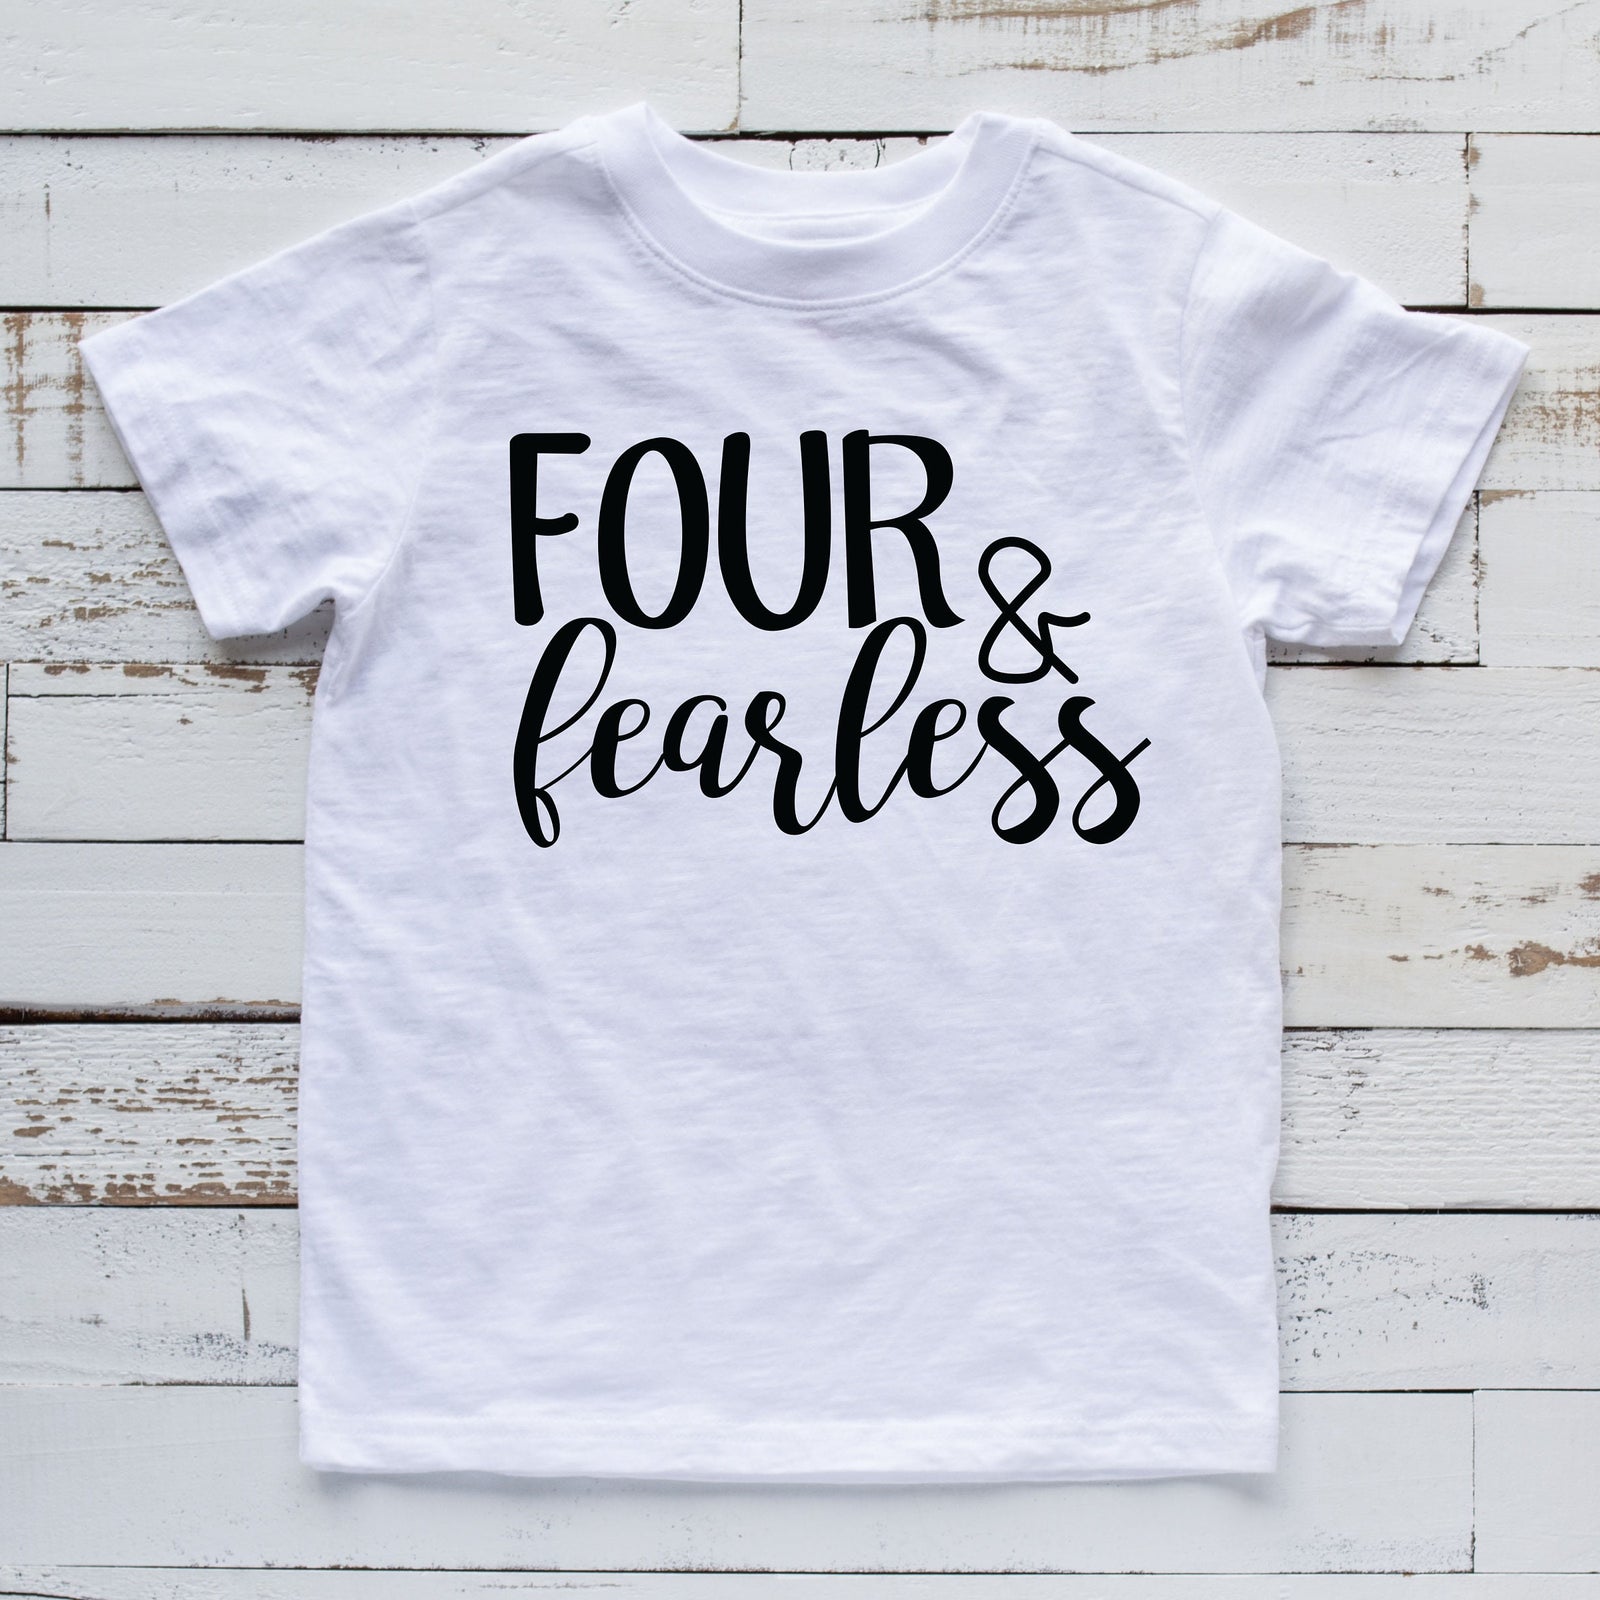 Four and Fearless T Shirt - Birthday Shirt for Boy - Birthday Shirt for Girl - Turning 4 - Turning Four